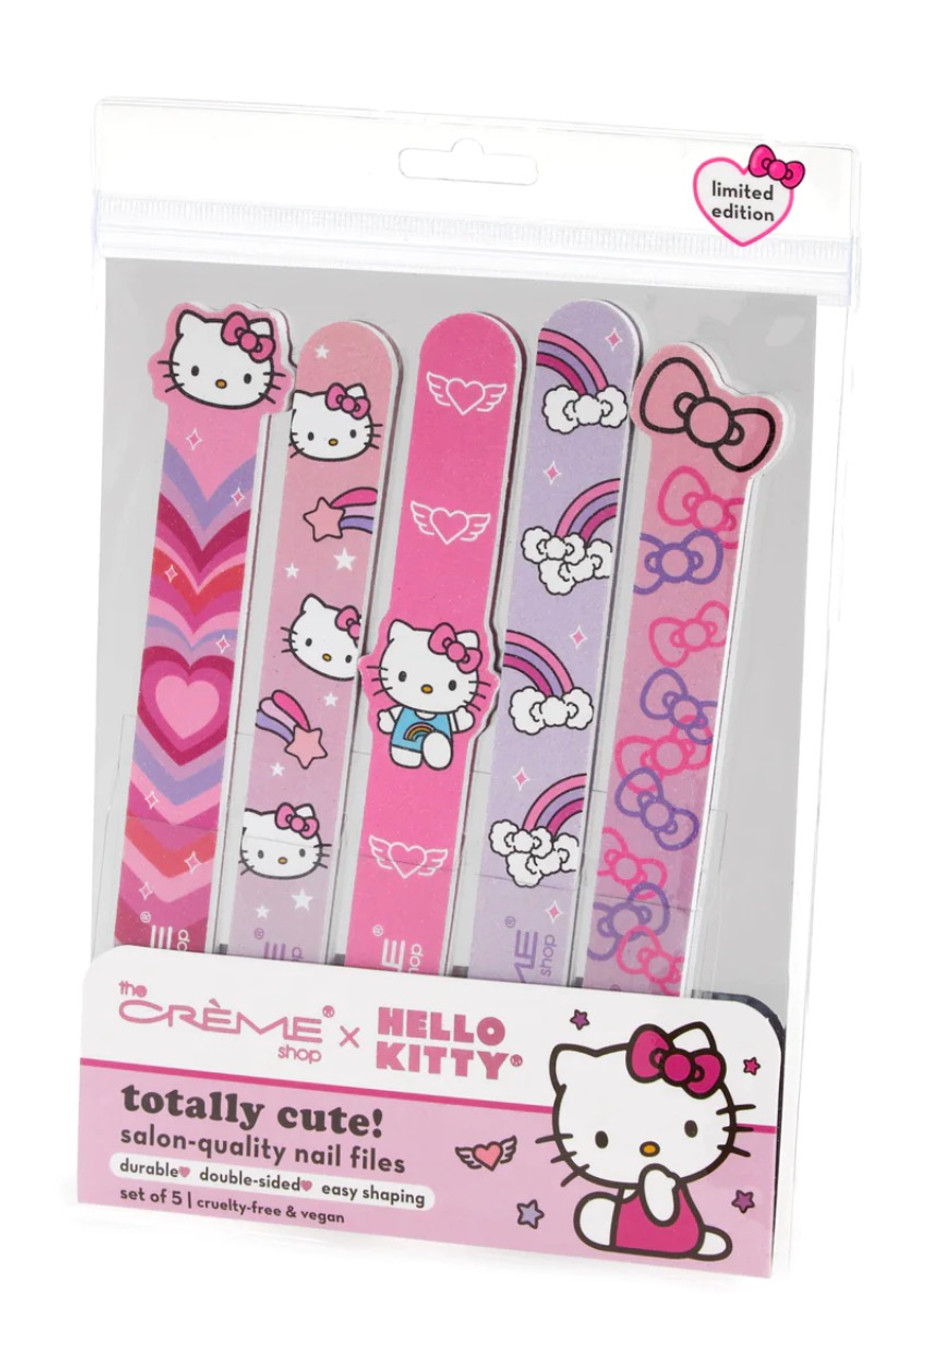 THE CREME SHOP x Hello Kitty Totally Cute! Nail Files (Set of 5)